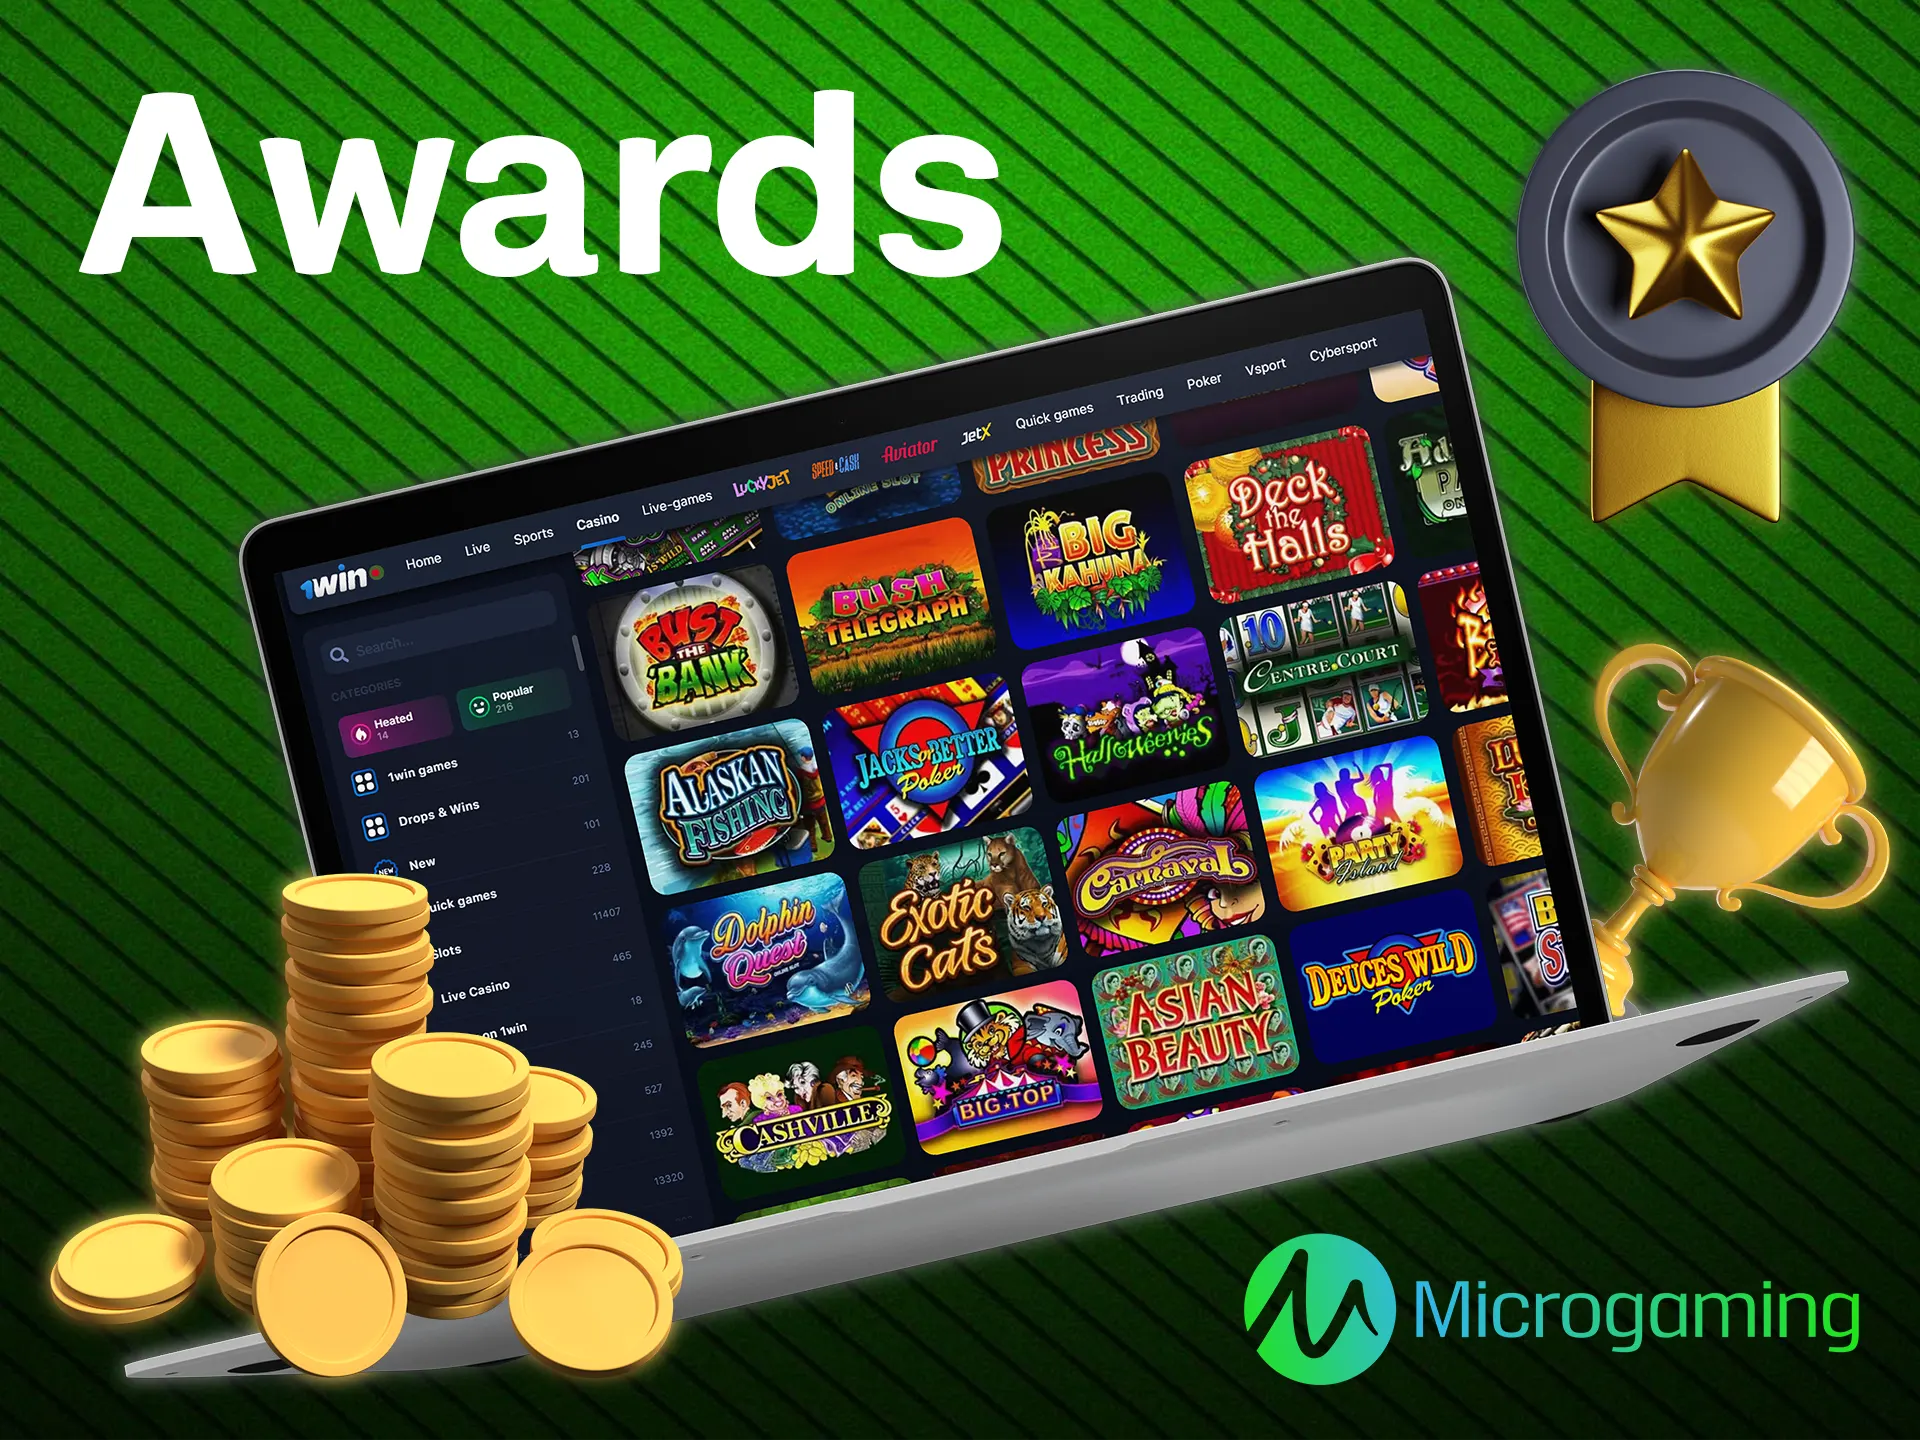 Microgaming is a casino games provider with many of the awards.